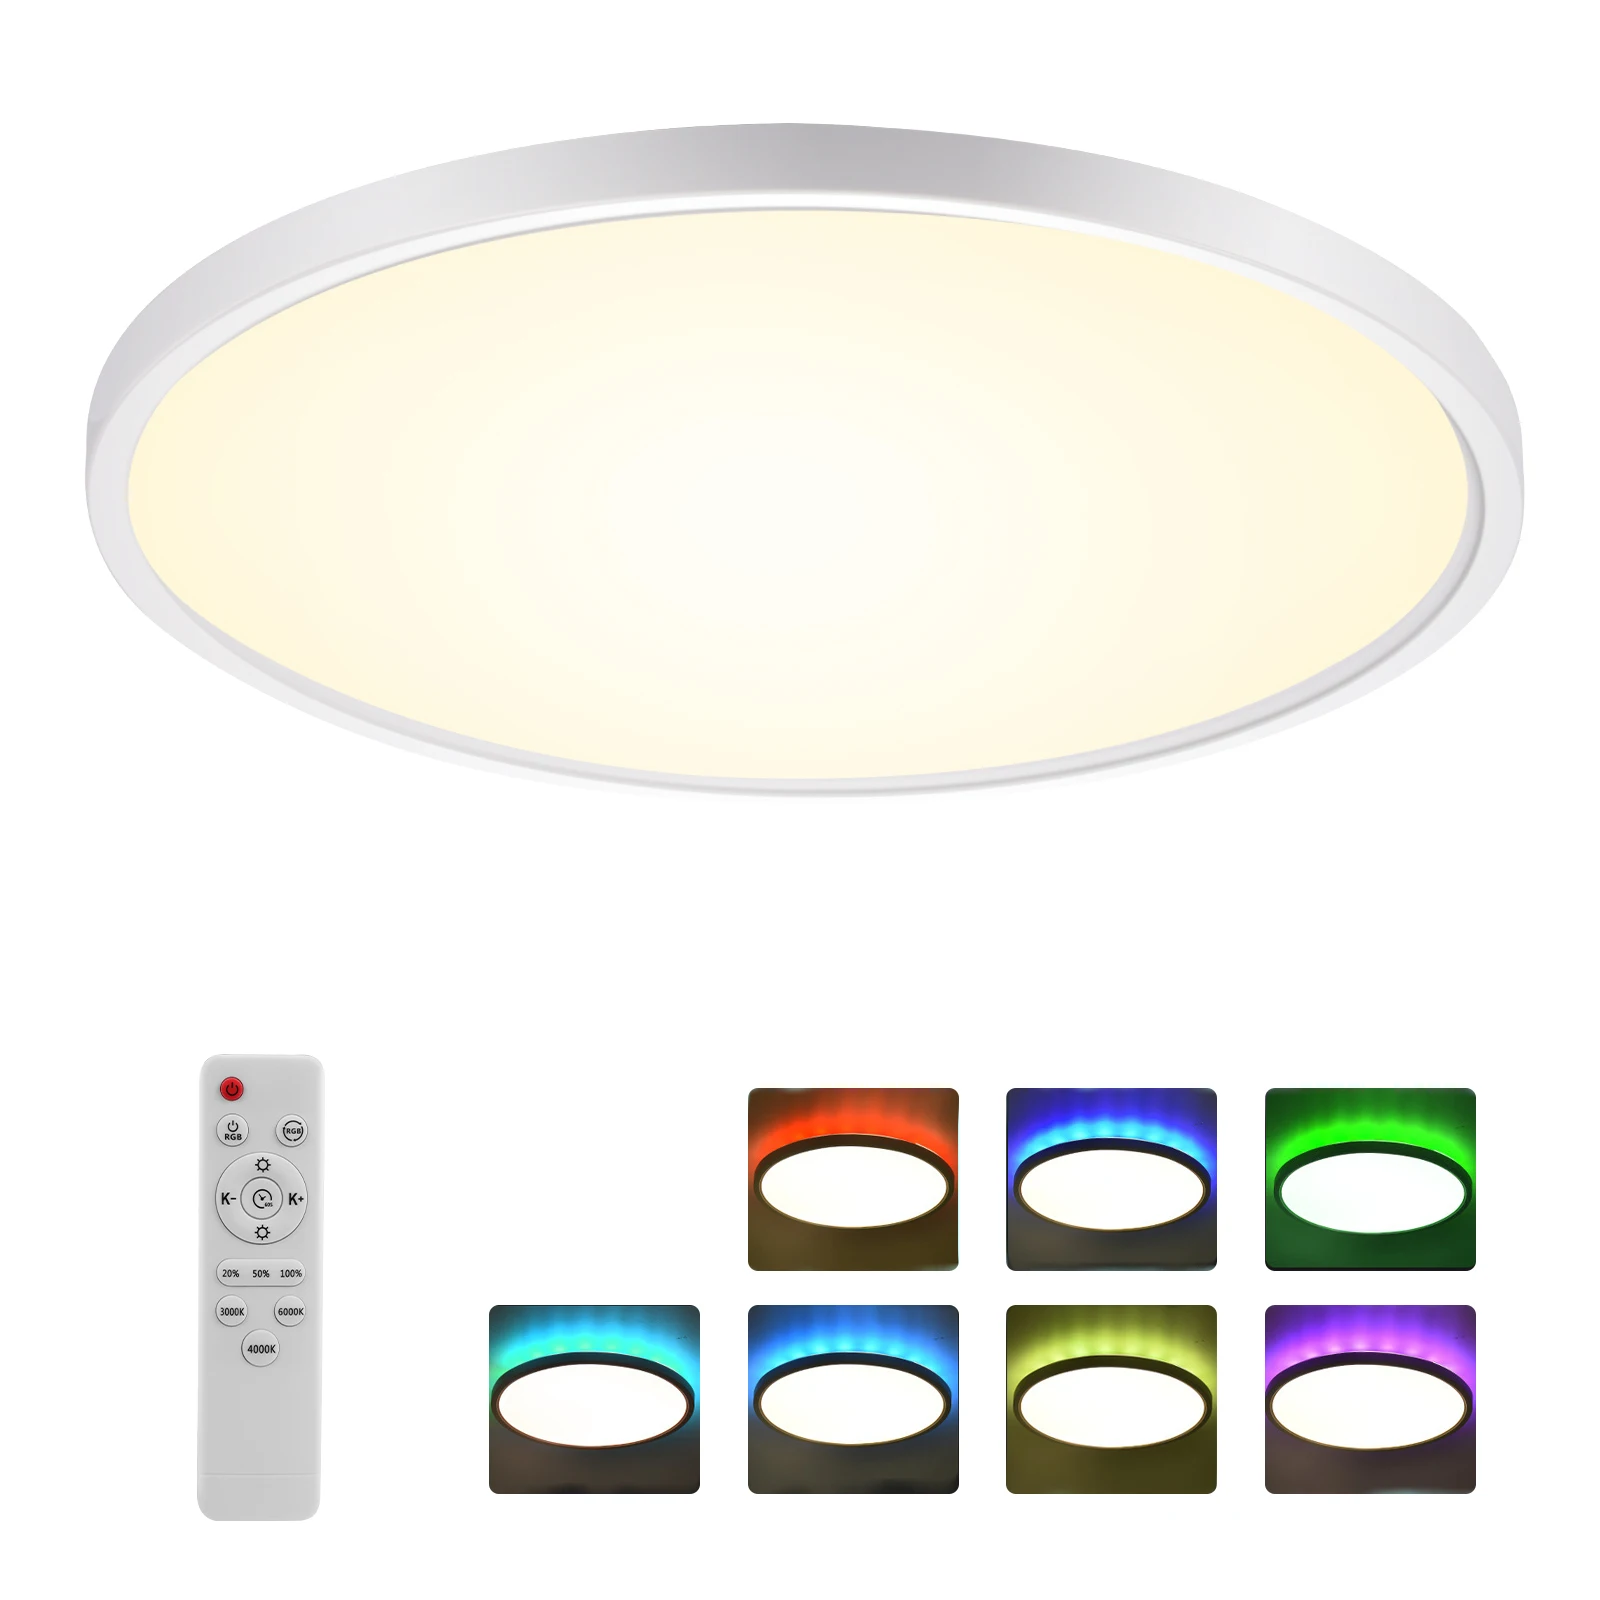 

24W 2400LM 3000K-6000K LED Ceiling Light Dimmable RGB Backlight Remote Control IP44 Waterproof Modern Recessed Lamp For Bathroom